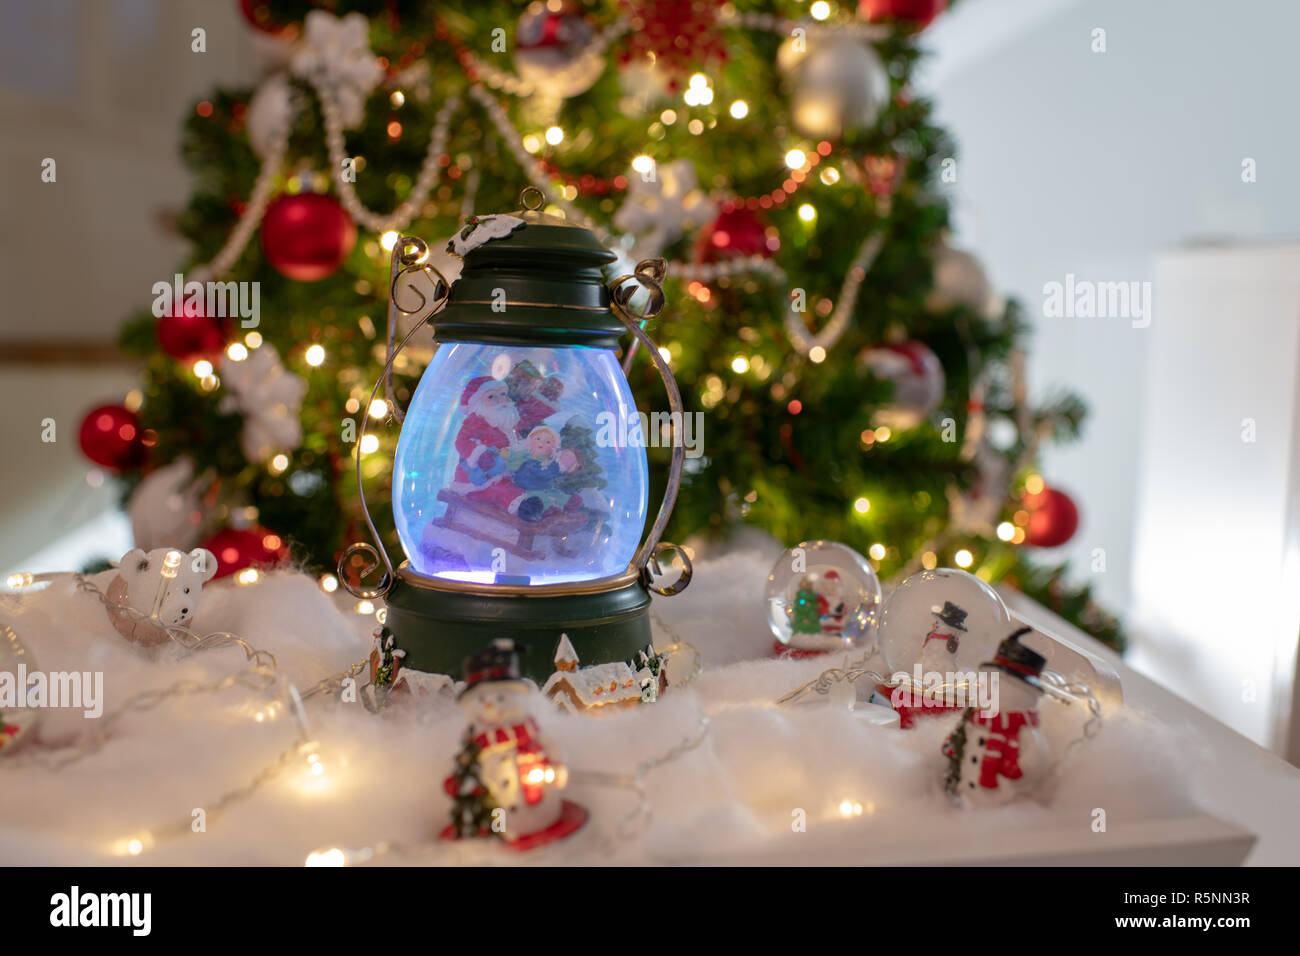 Christmas decoration, snow dome, globe with table decoration, Santaclaus on  sleigh with child in winter scene with snowflakes, reindeer snowglobe and  Stock Photo - Alamy